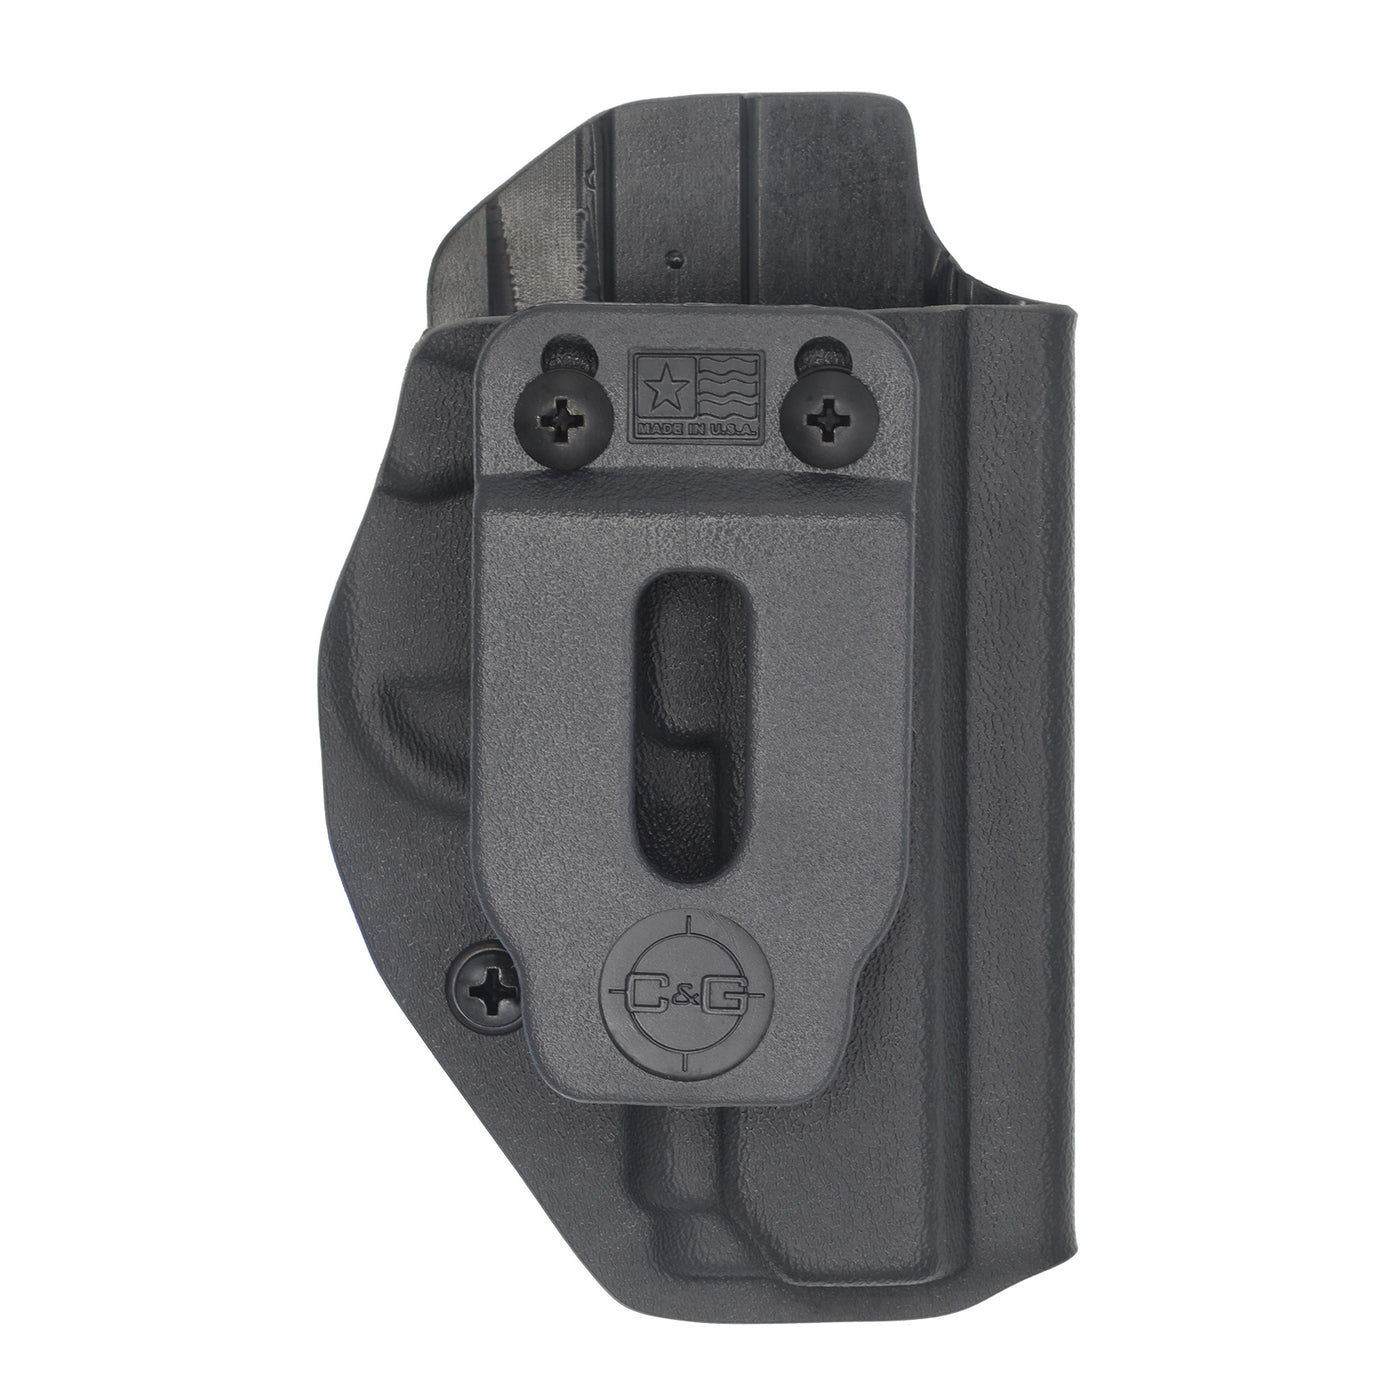 C&G Holsters quick ship Covert IWB kydex holster for Sig P938 in black front view